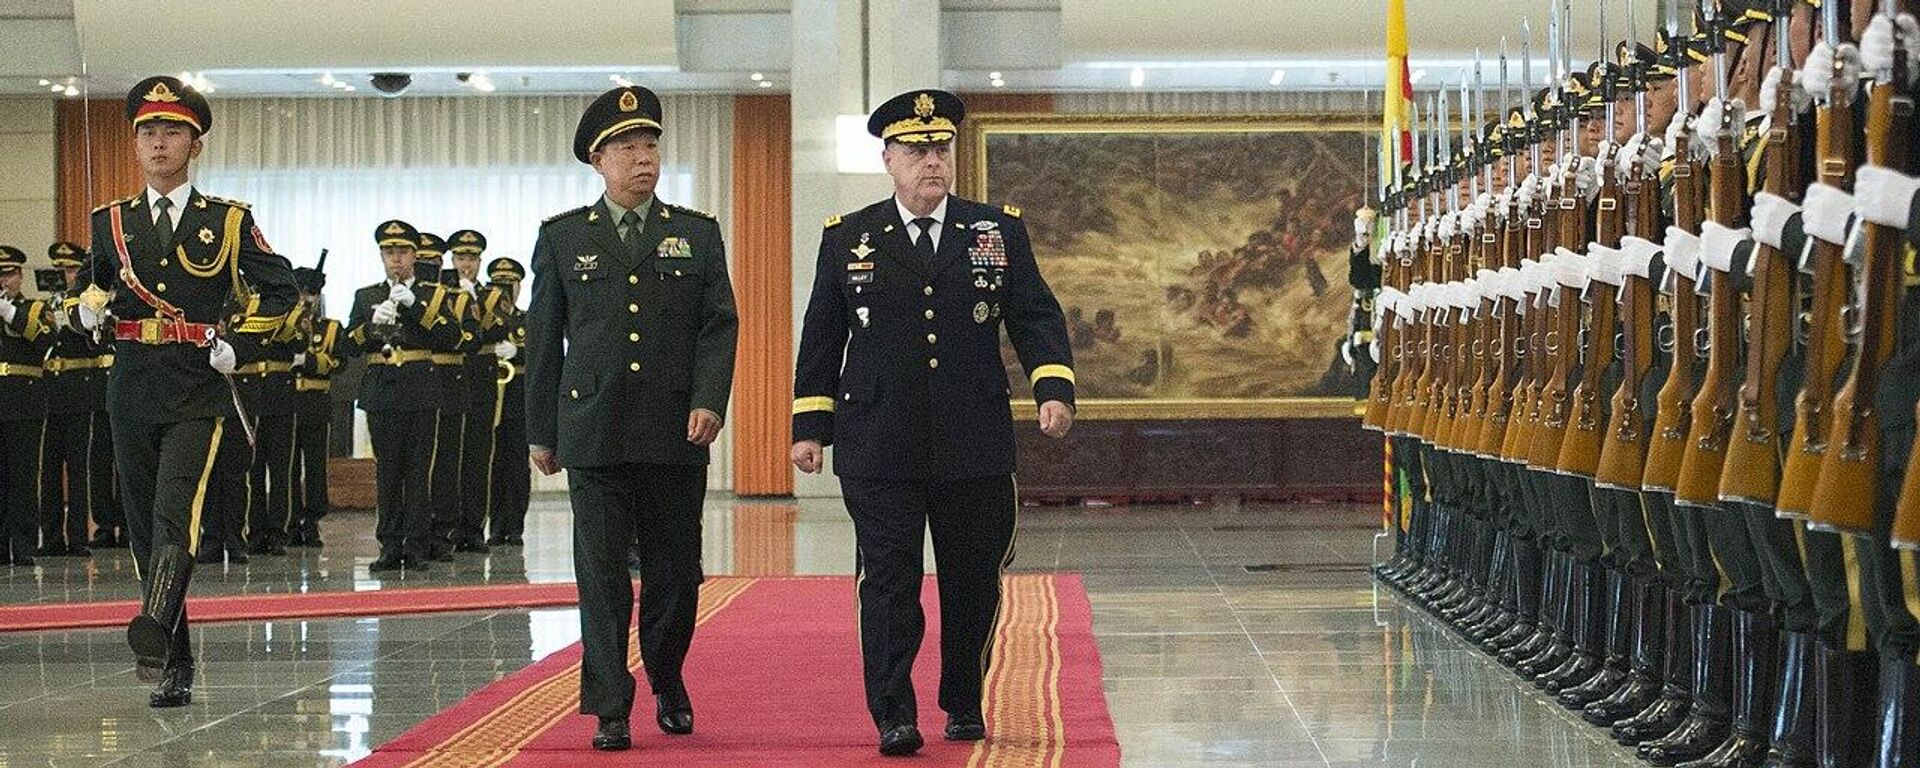  U.S. Army Chief of Staff General Mark A. Milley and Commander of the PLA Ground Force General Li Zuocheng inspect a Chinese military contingent at the Bayi Building in Beijing, China, Aug. 16, 2016 - Sputnik International, 1920, 28.09.2021